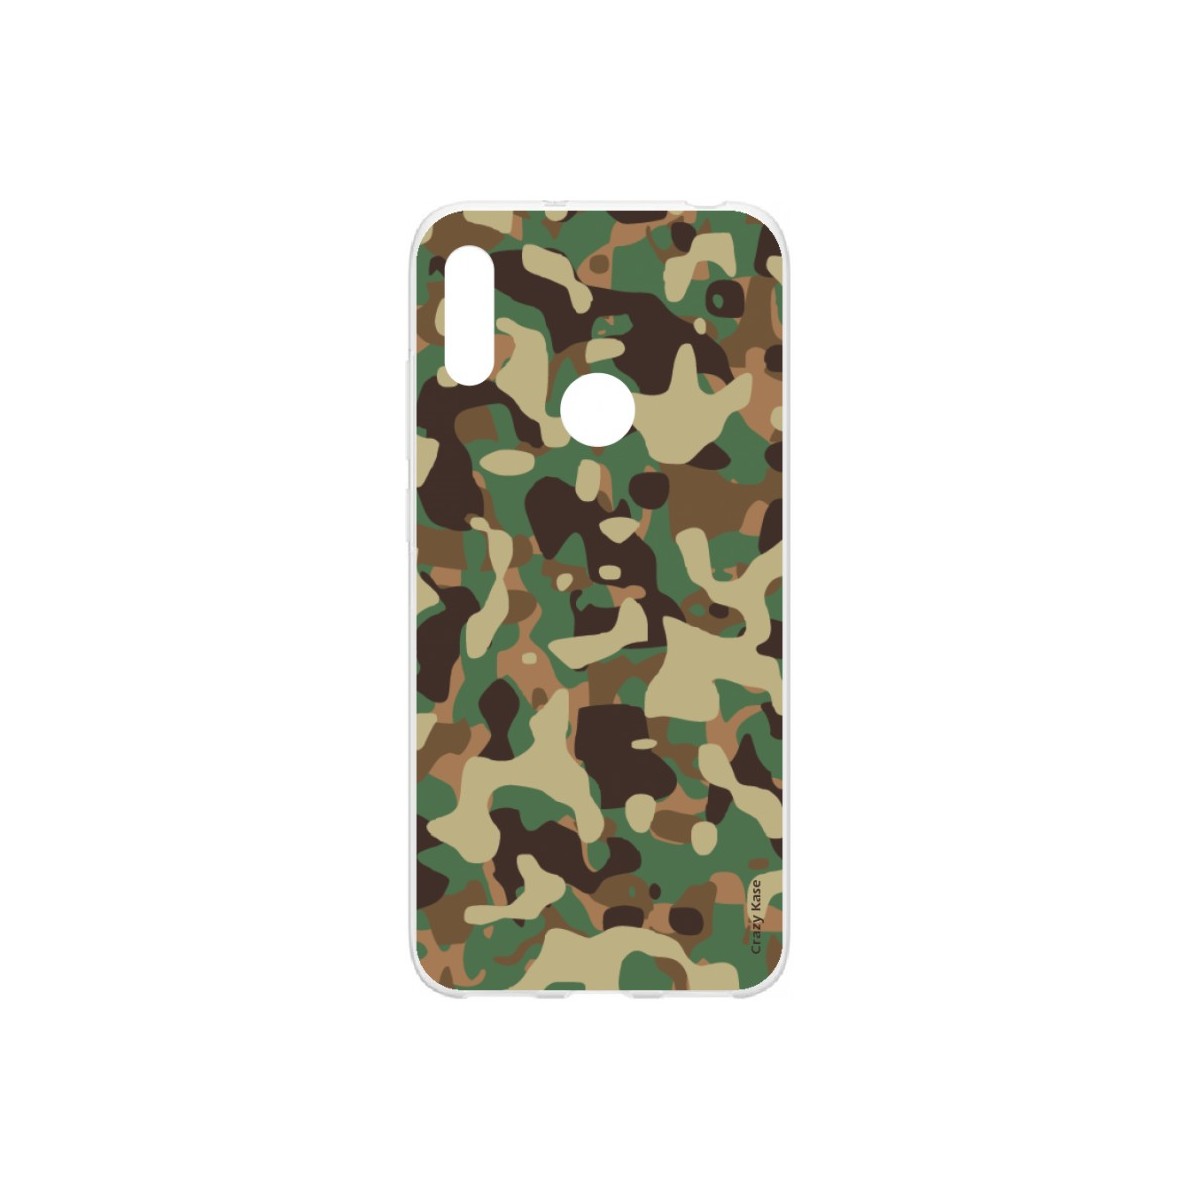 Coque Huawei Y6s souple Camouflage militaire Crazy Kase